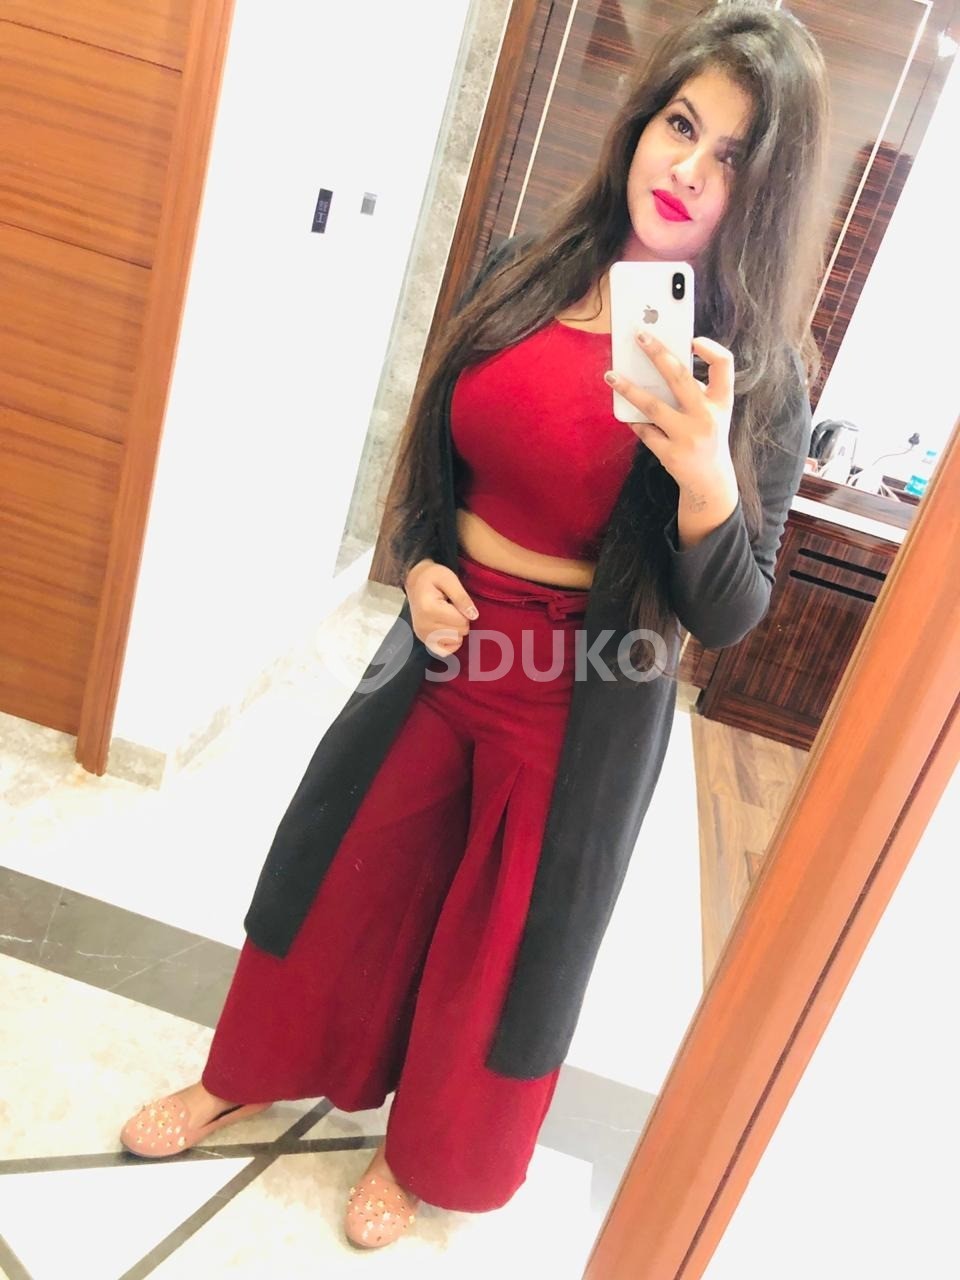 WAKAD 😋 VIP TODAY LOW PRICE ESCORT 🥰SERVICE 100% SAFE AND SECURE ANYTIME CALL ME 24 X 7 SERVICE AVAILABLE 100%